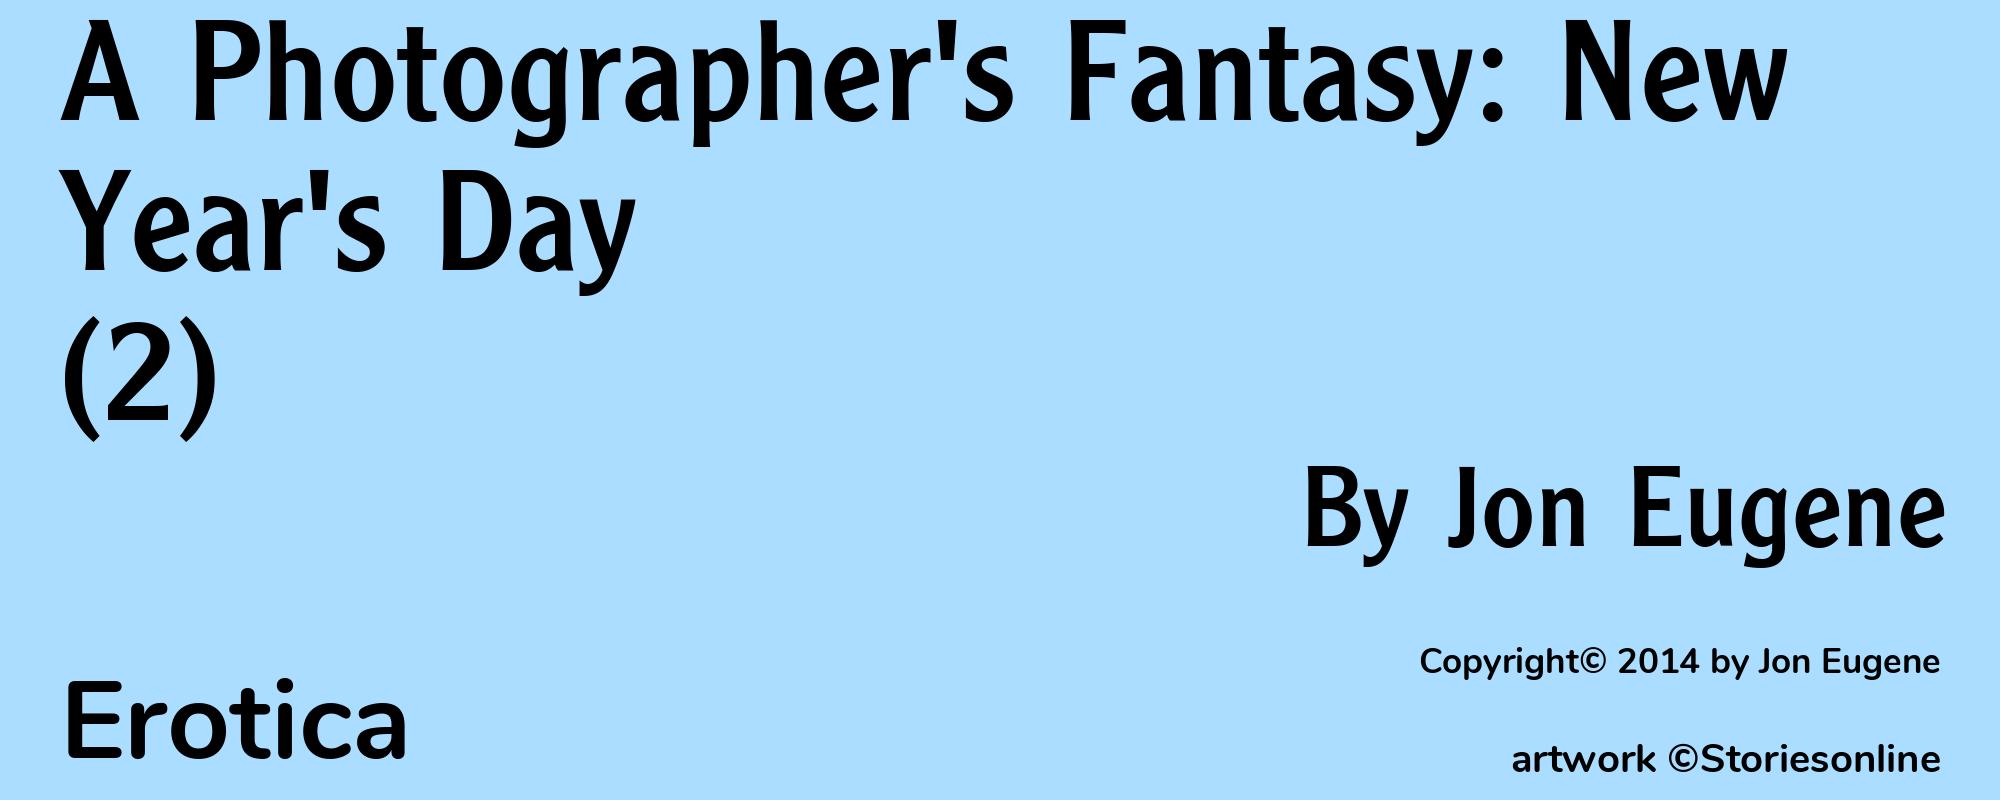 A Photographer's Fantasy: New Year's Day (2) - Cover